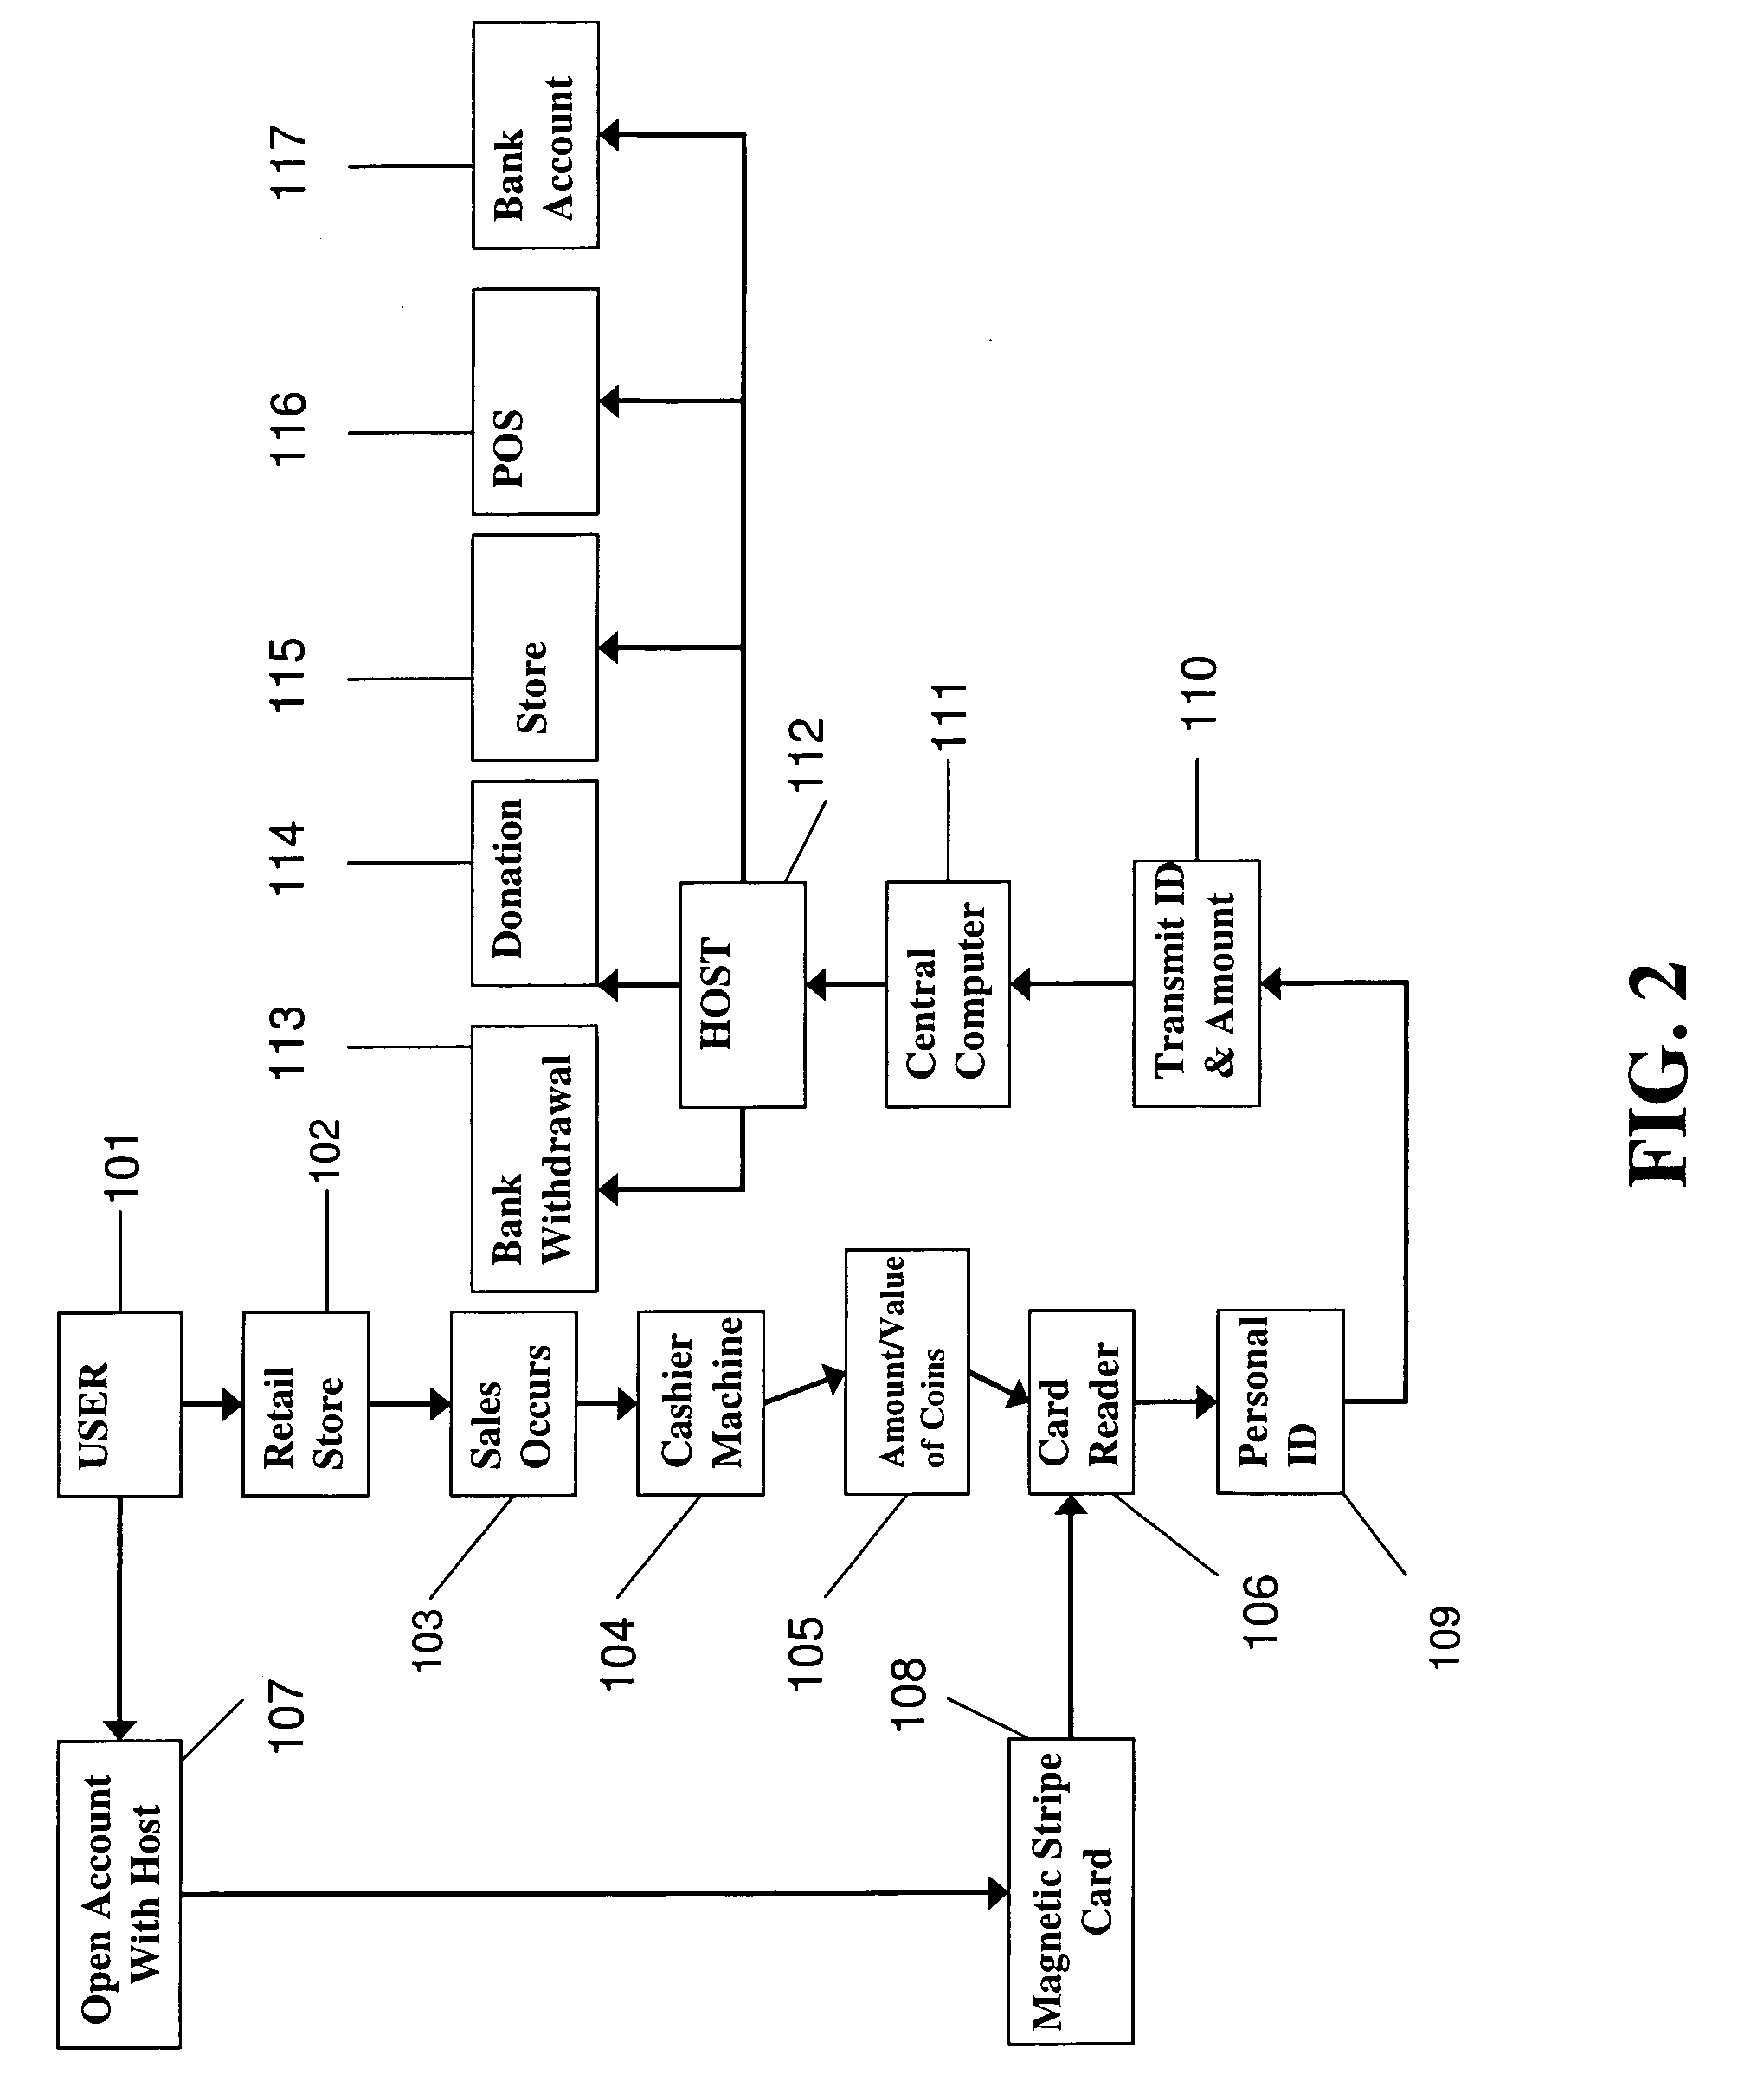 Novel Coin Exchange system and method